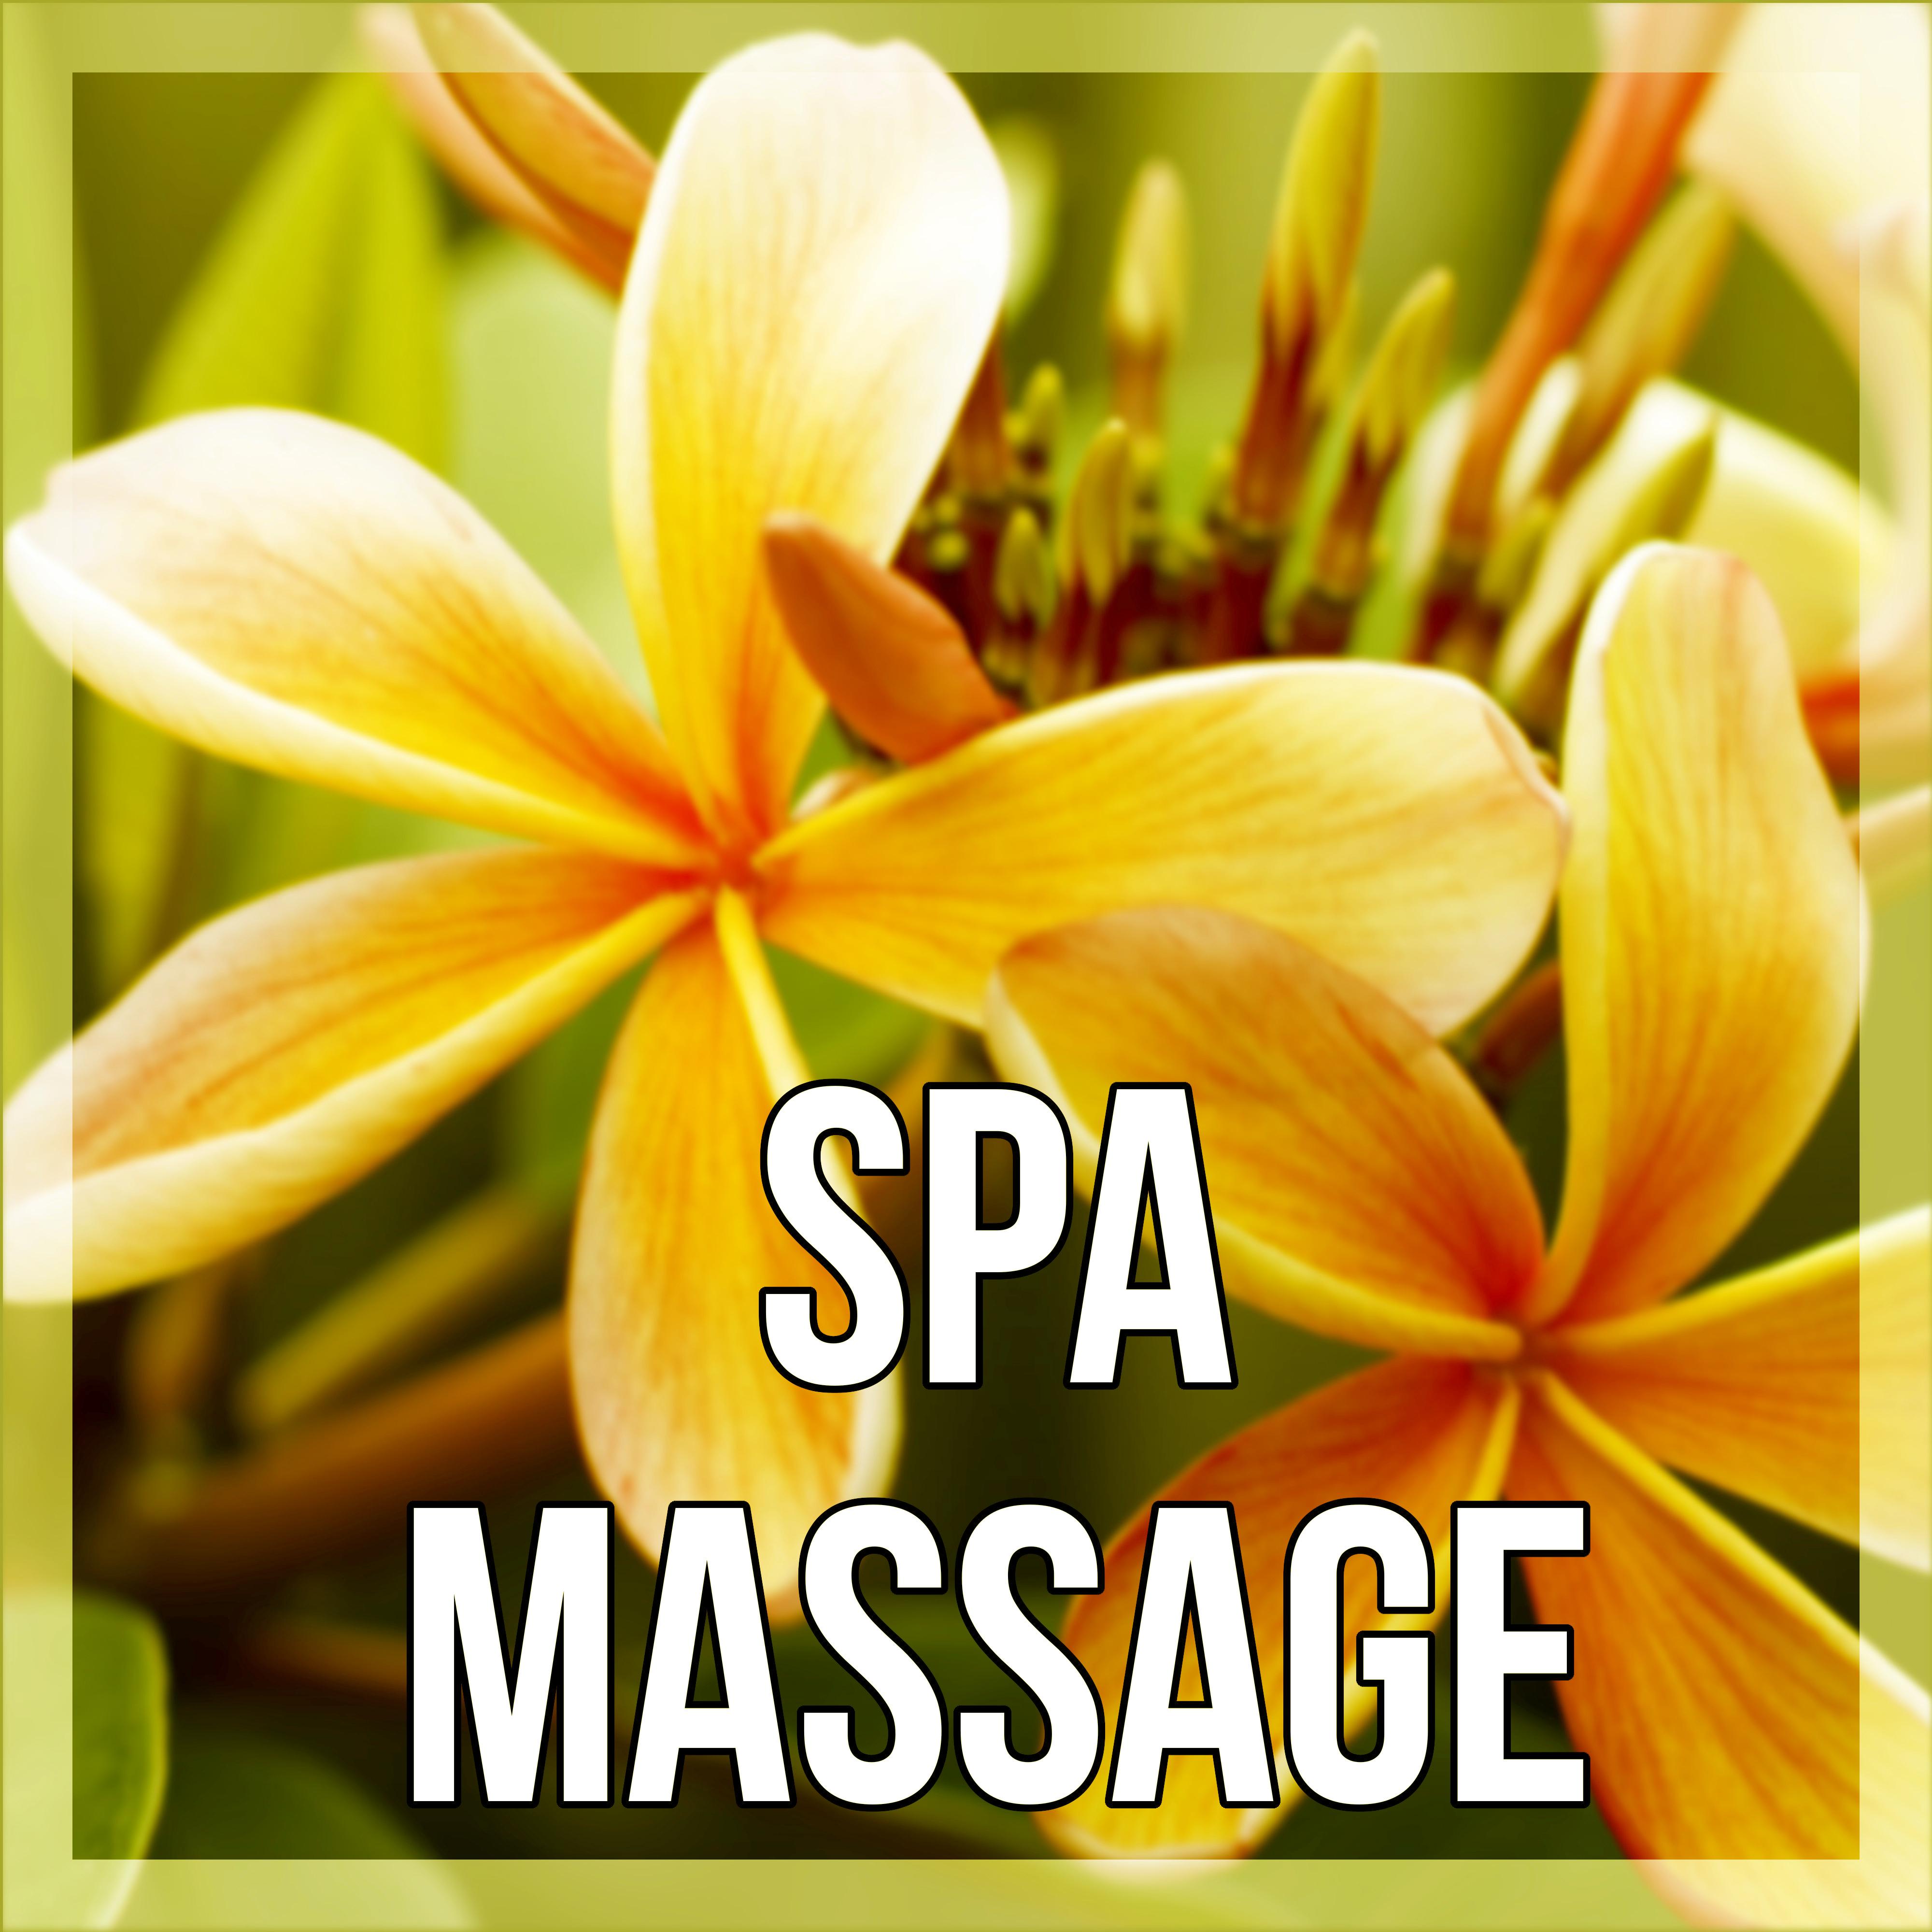 Spa Massage – Spa Sounds, Nature Music, Soft Music, Relaxation, New Age, Calm Background Music